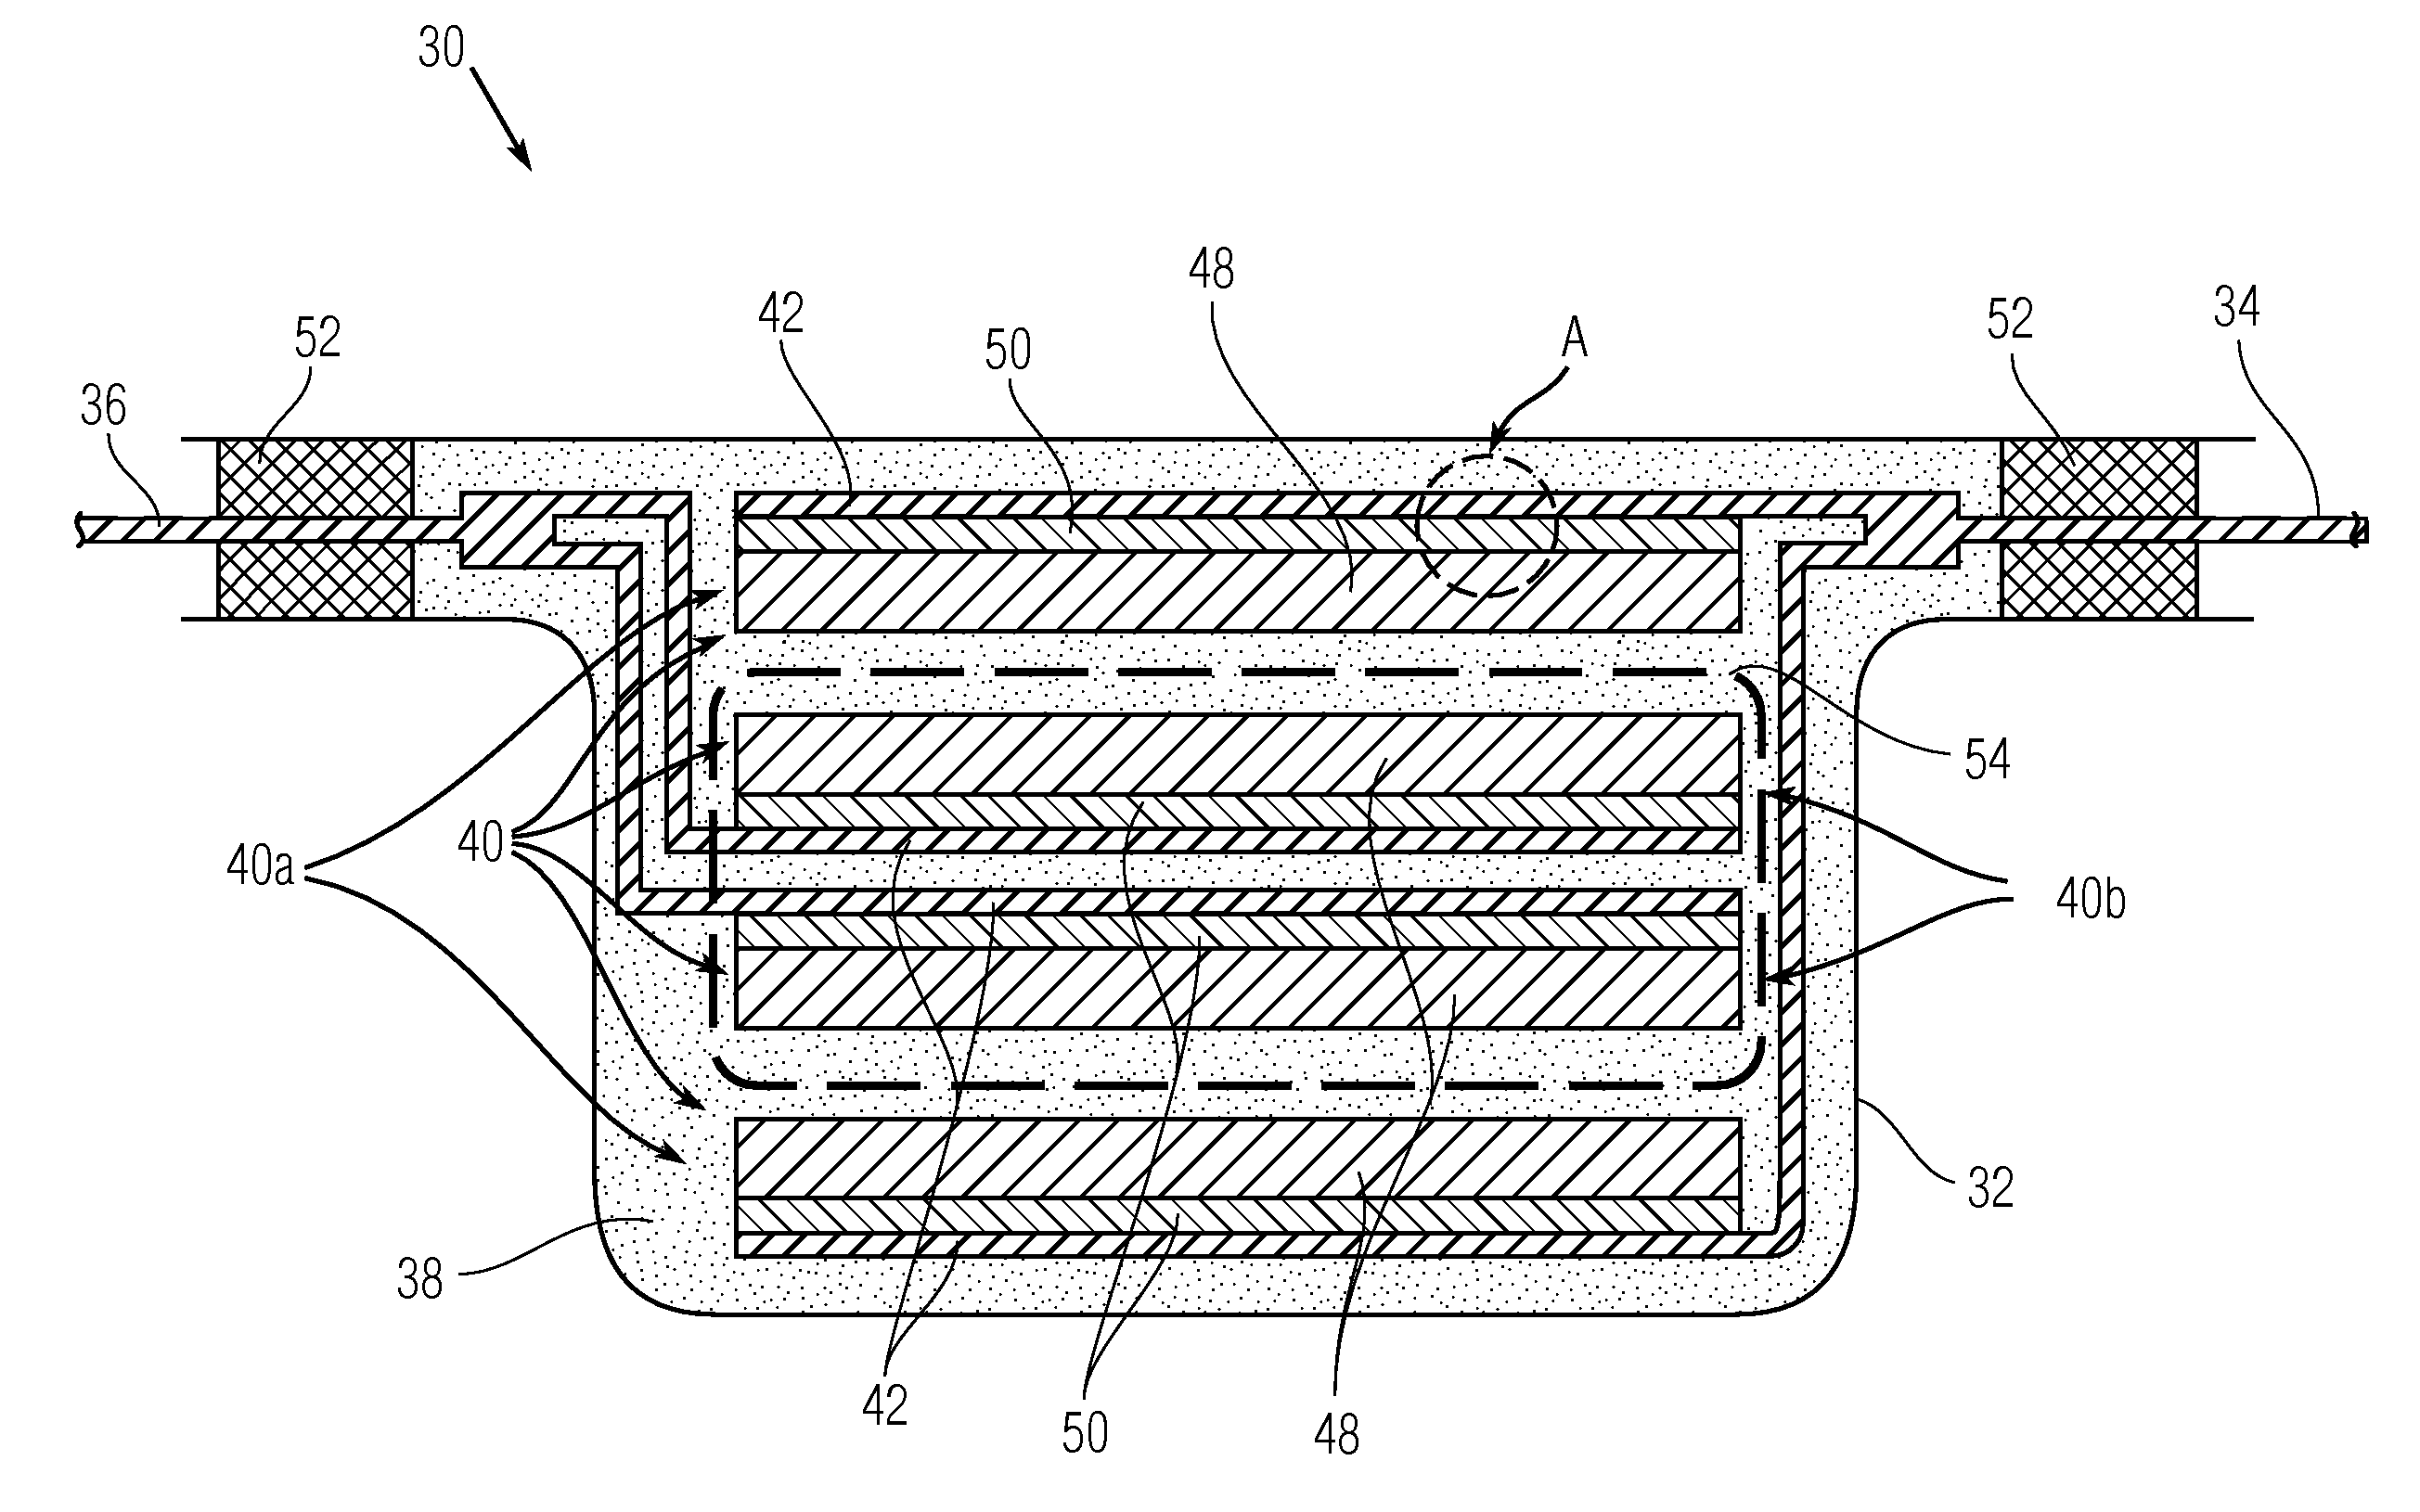 Electrochemical double layer capacitor